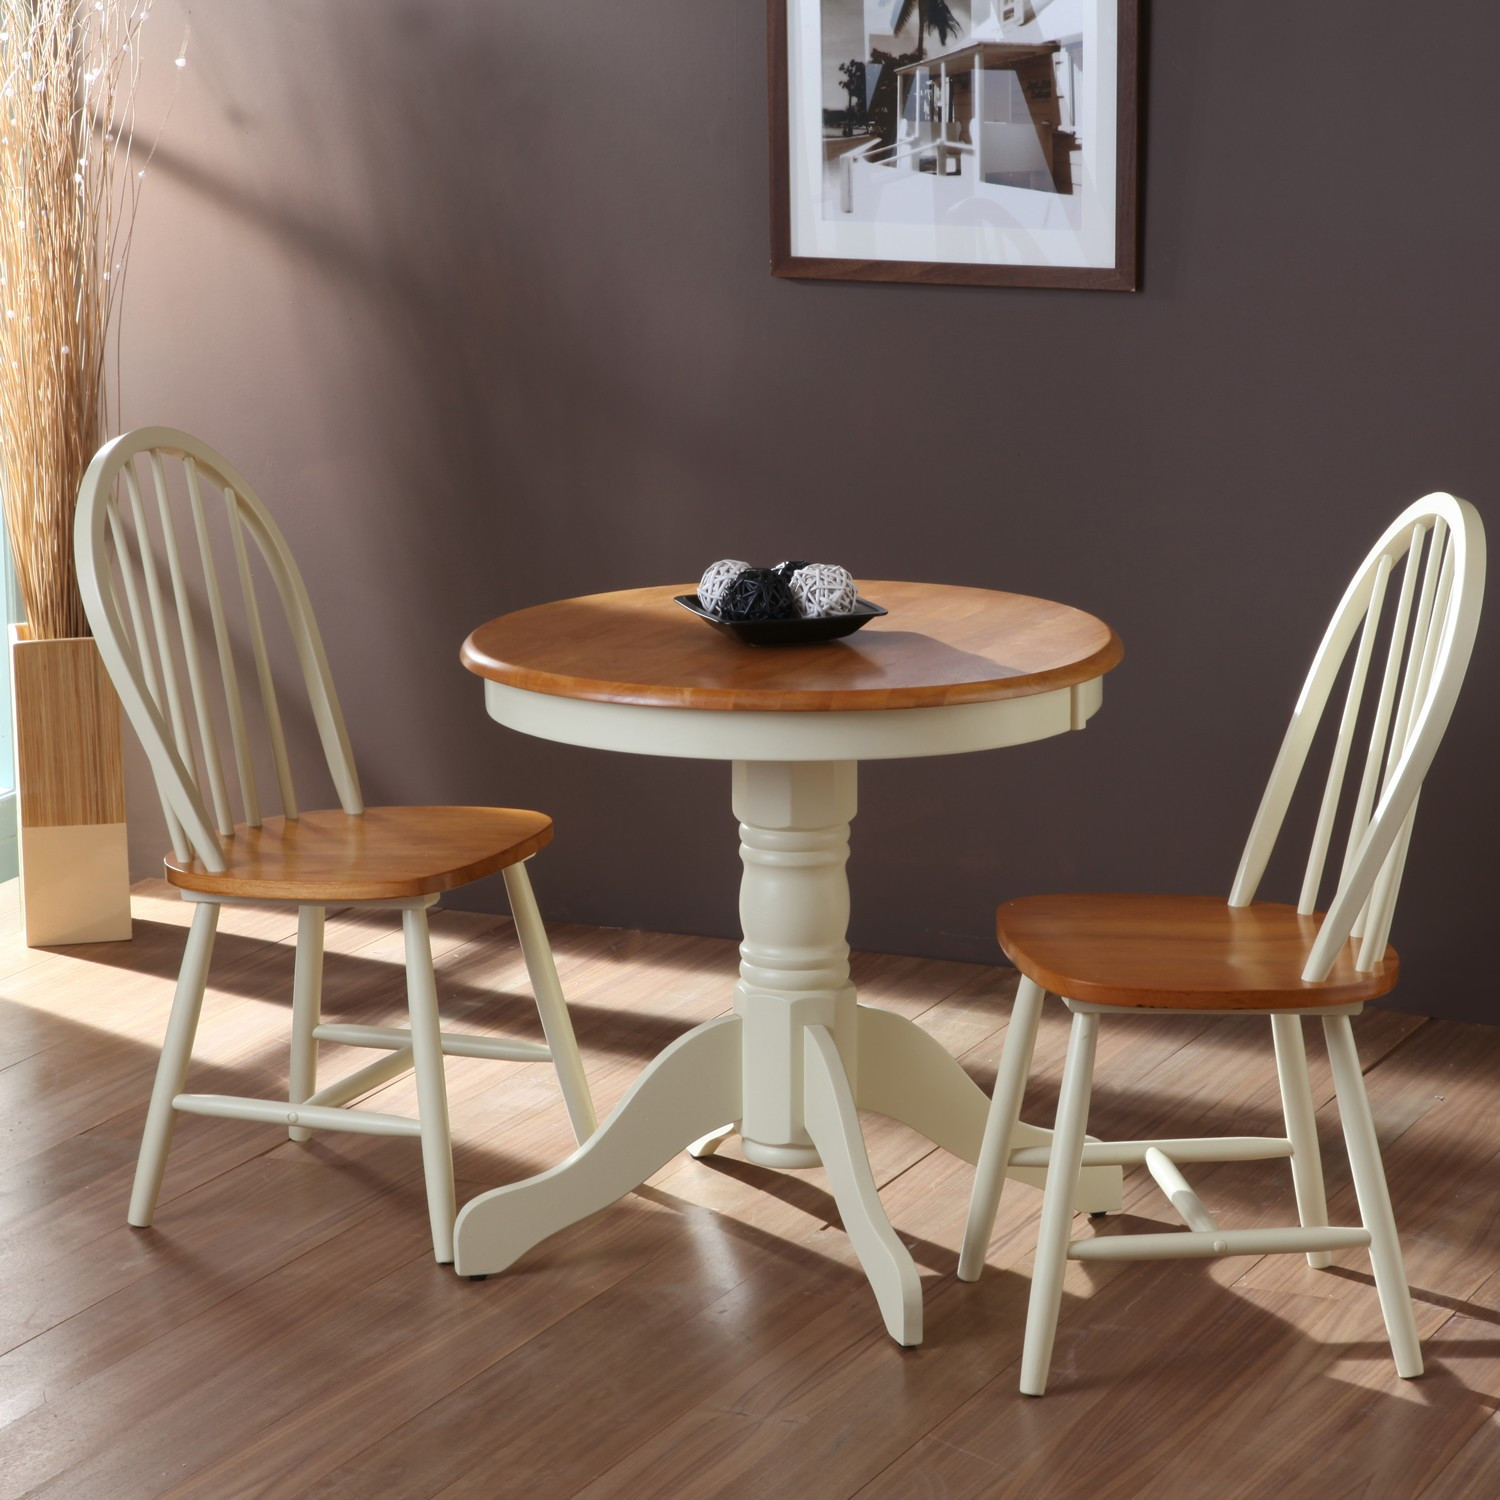 Small Round Kitchen Table
 Beautiful White Round Kitchen Table and Chairs